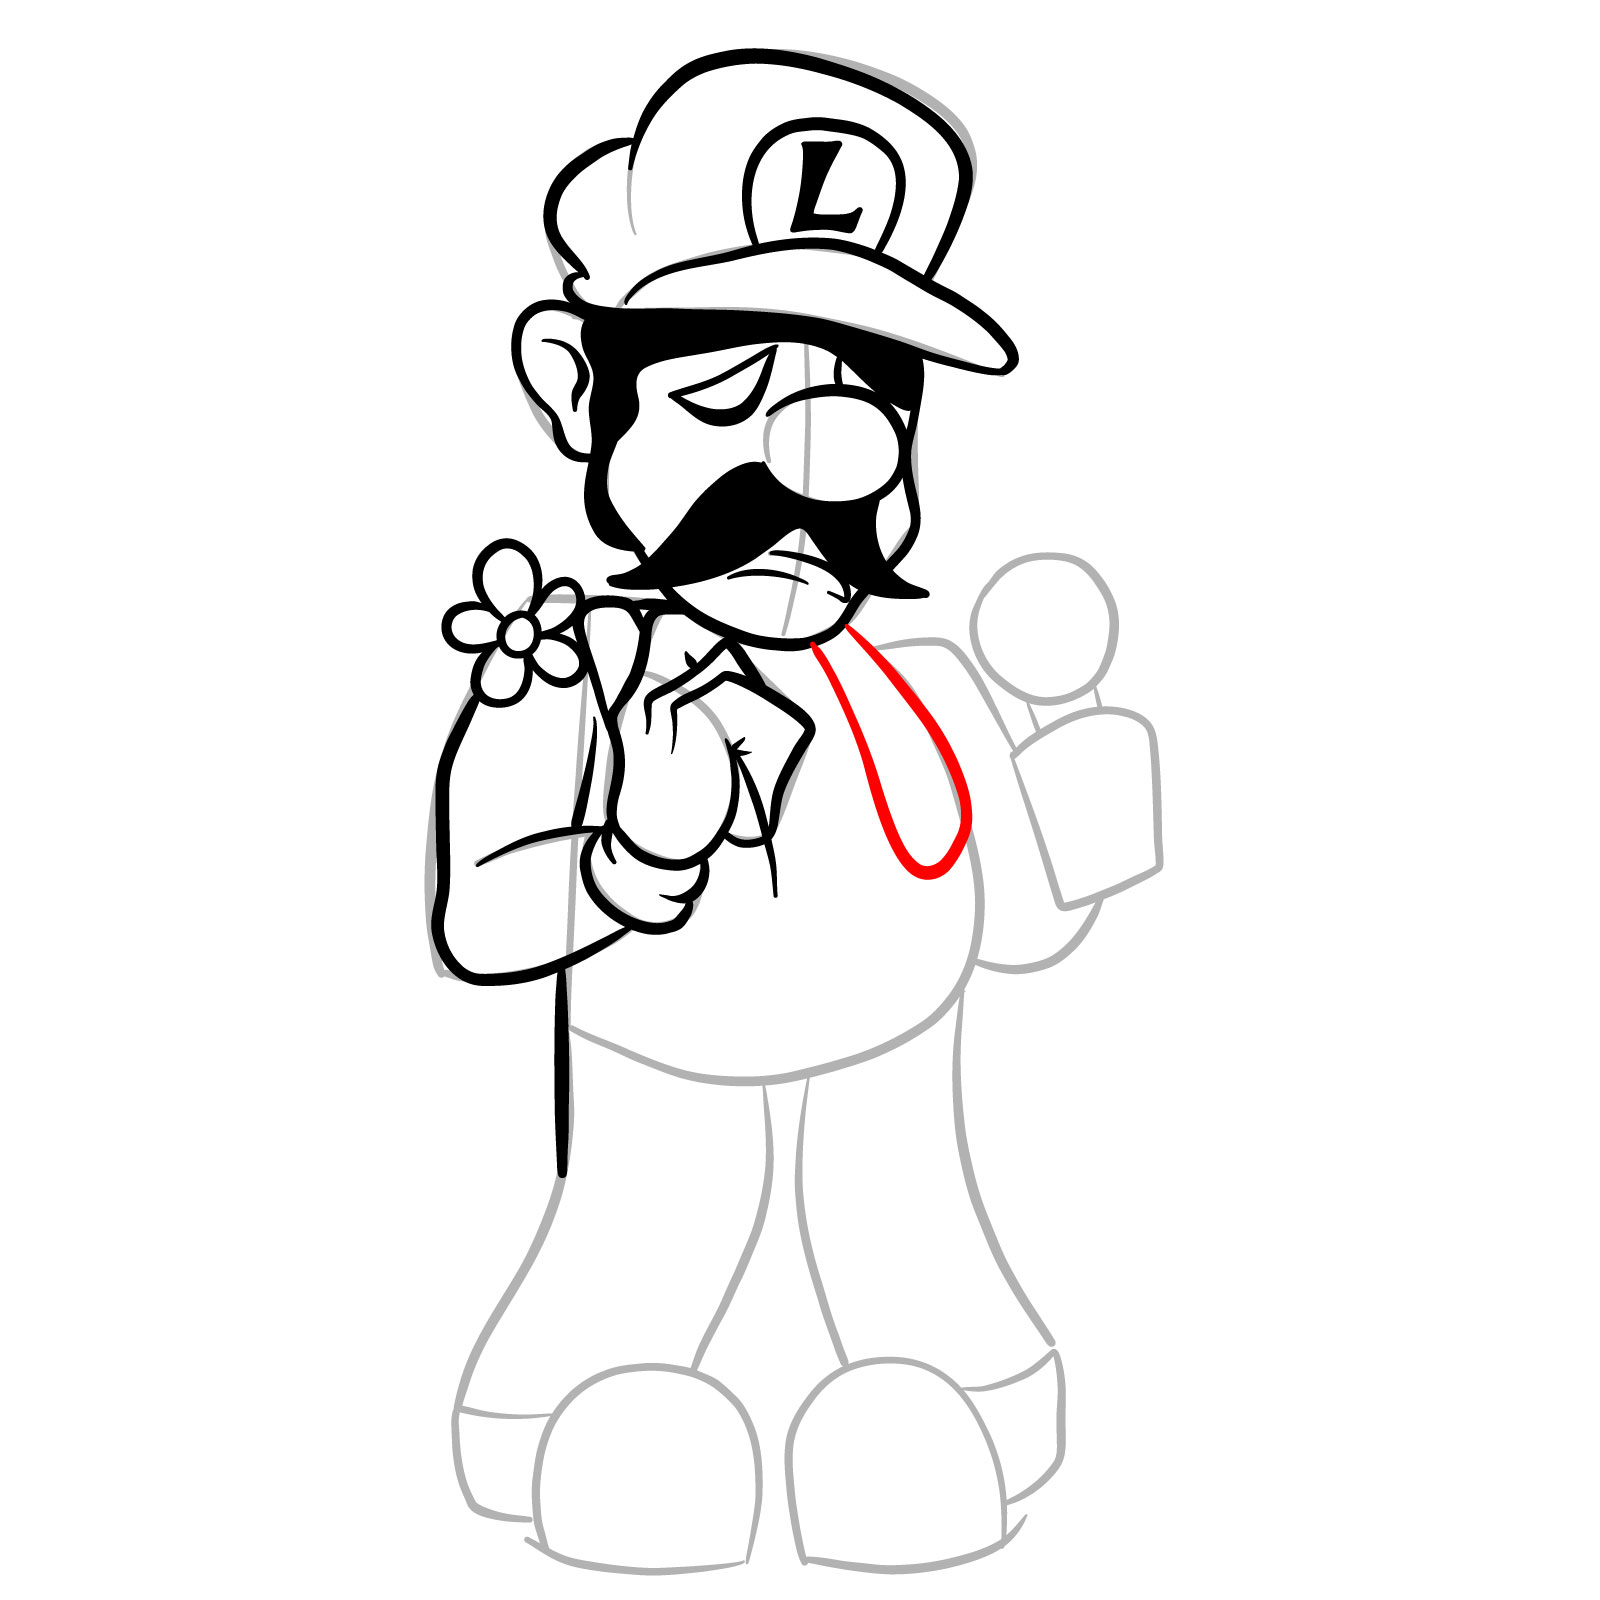 How to draw Beta Luigi from FNF - step 21